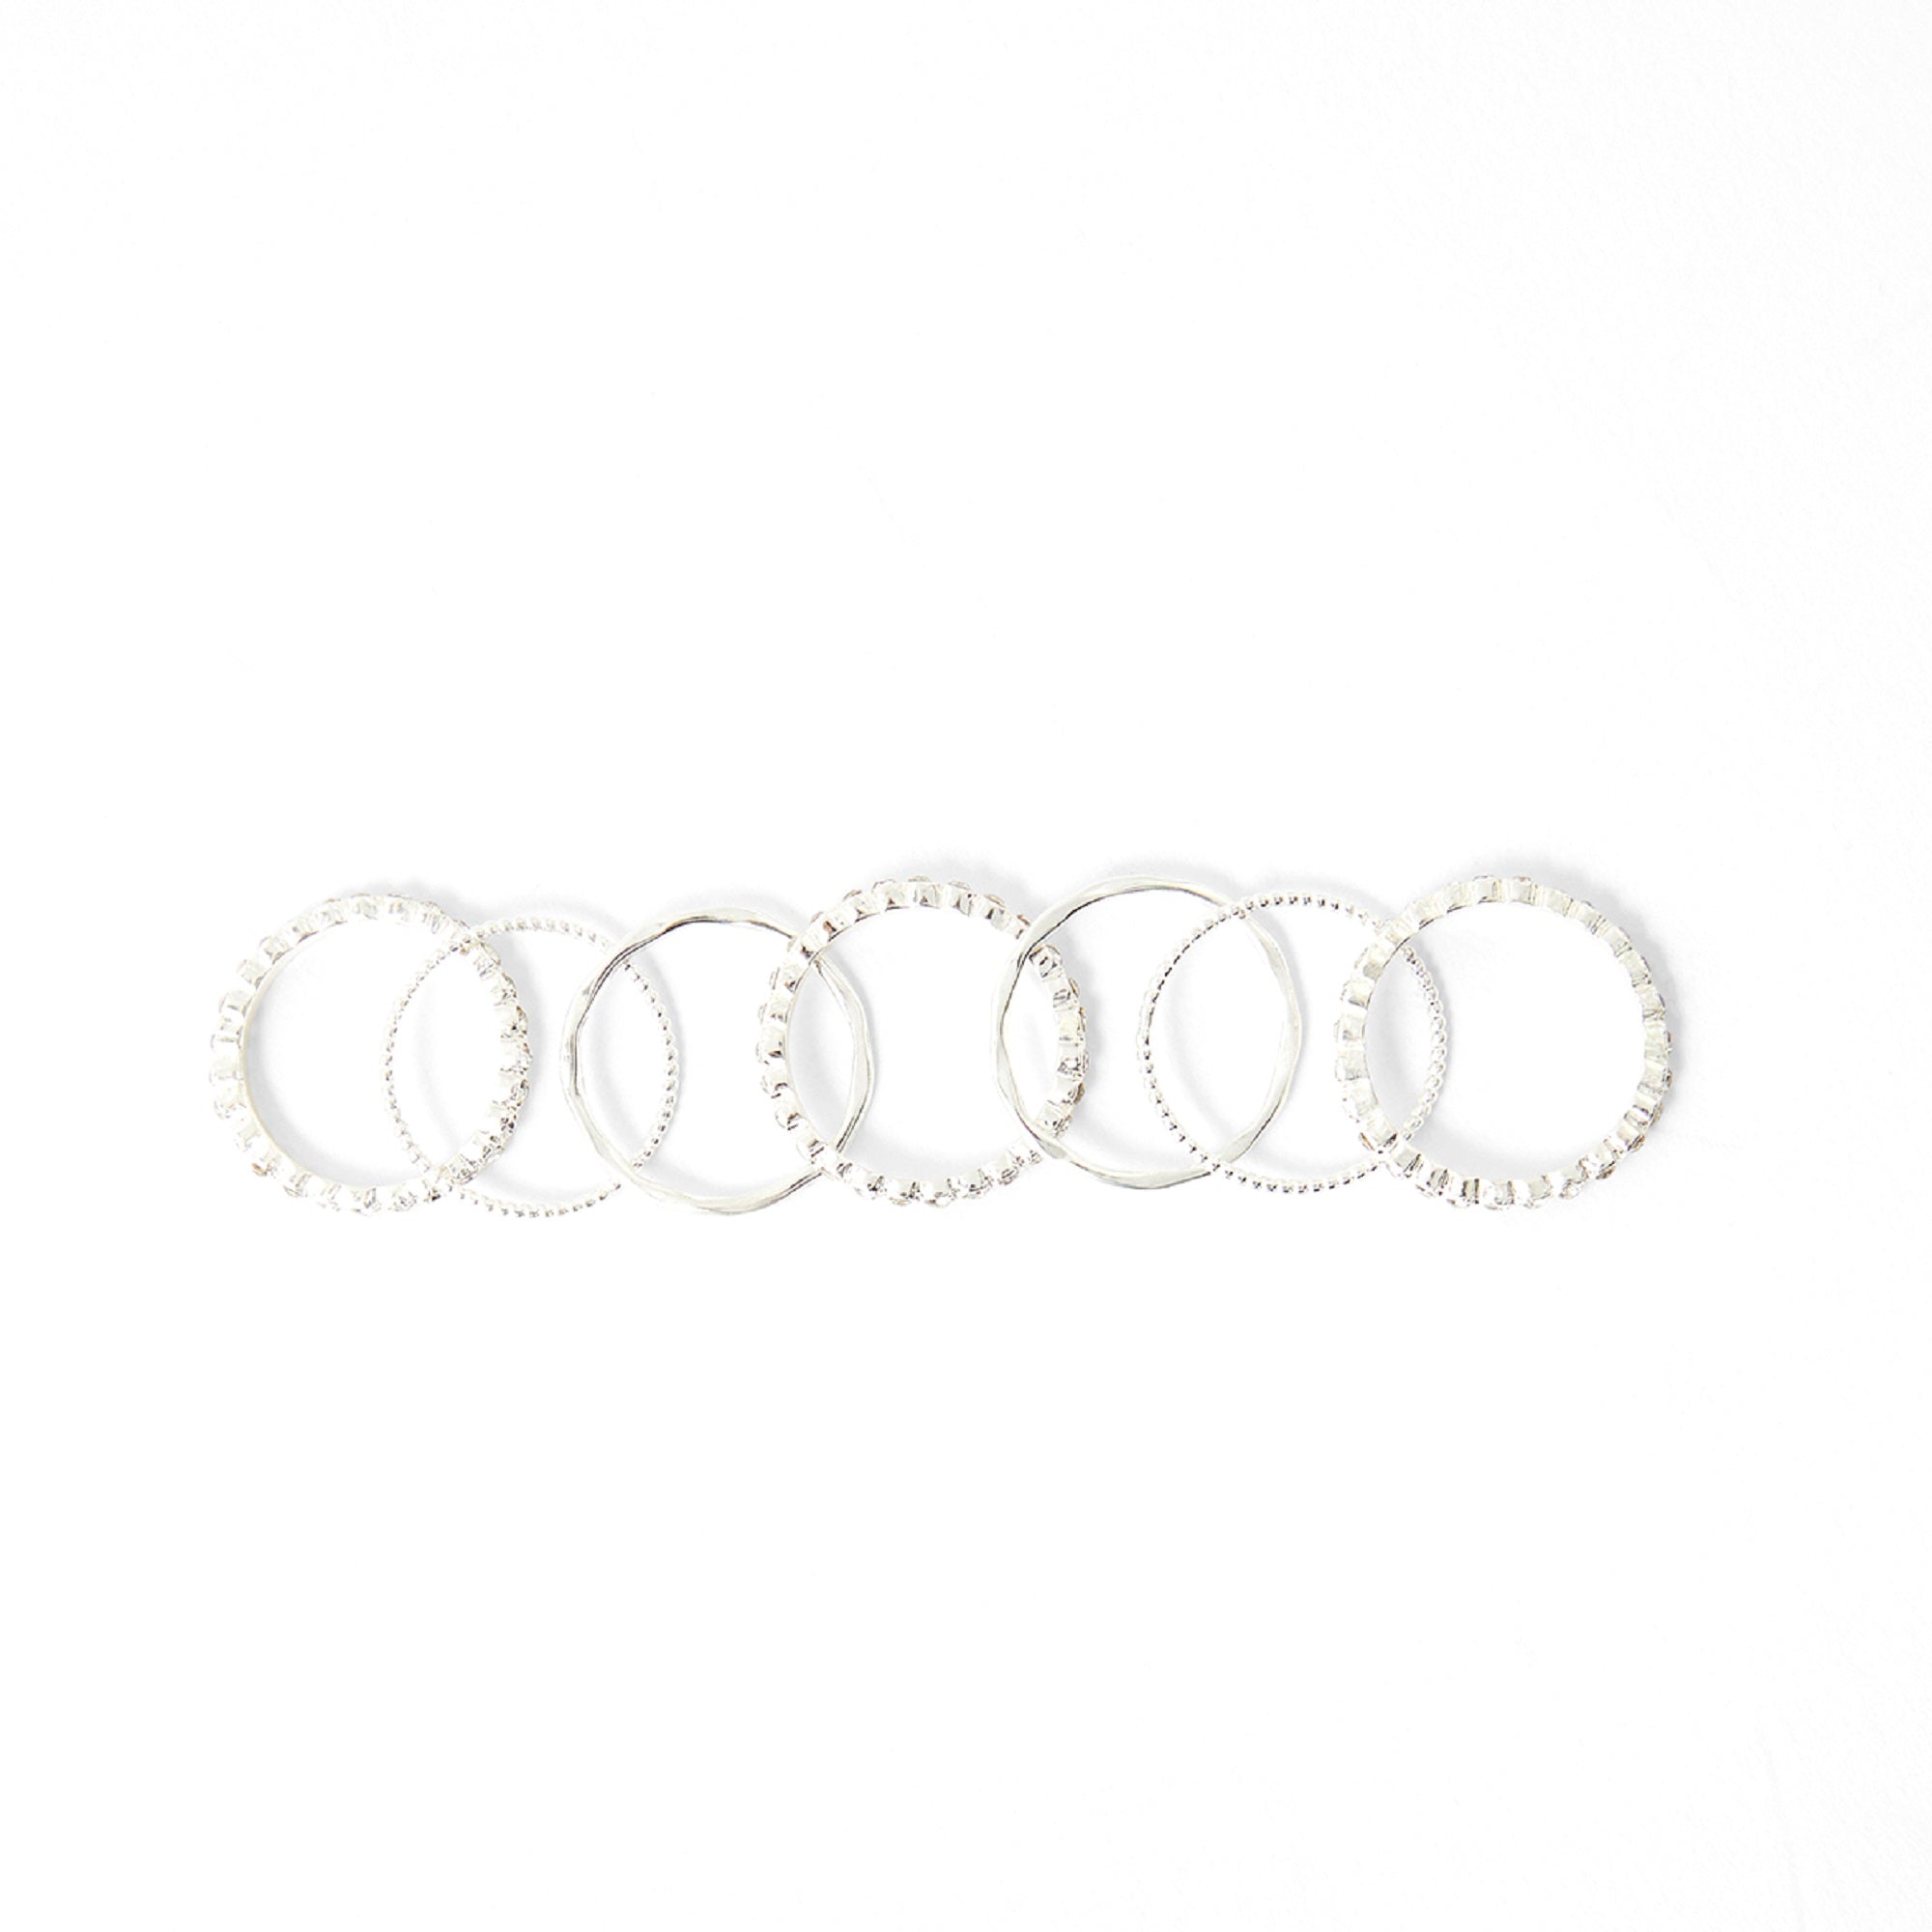 Accessorize London Women's Silver set of 7 Pave Organic Stacking Rings